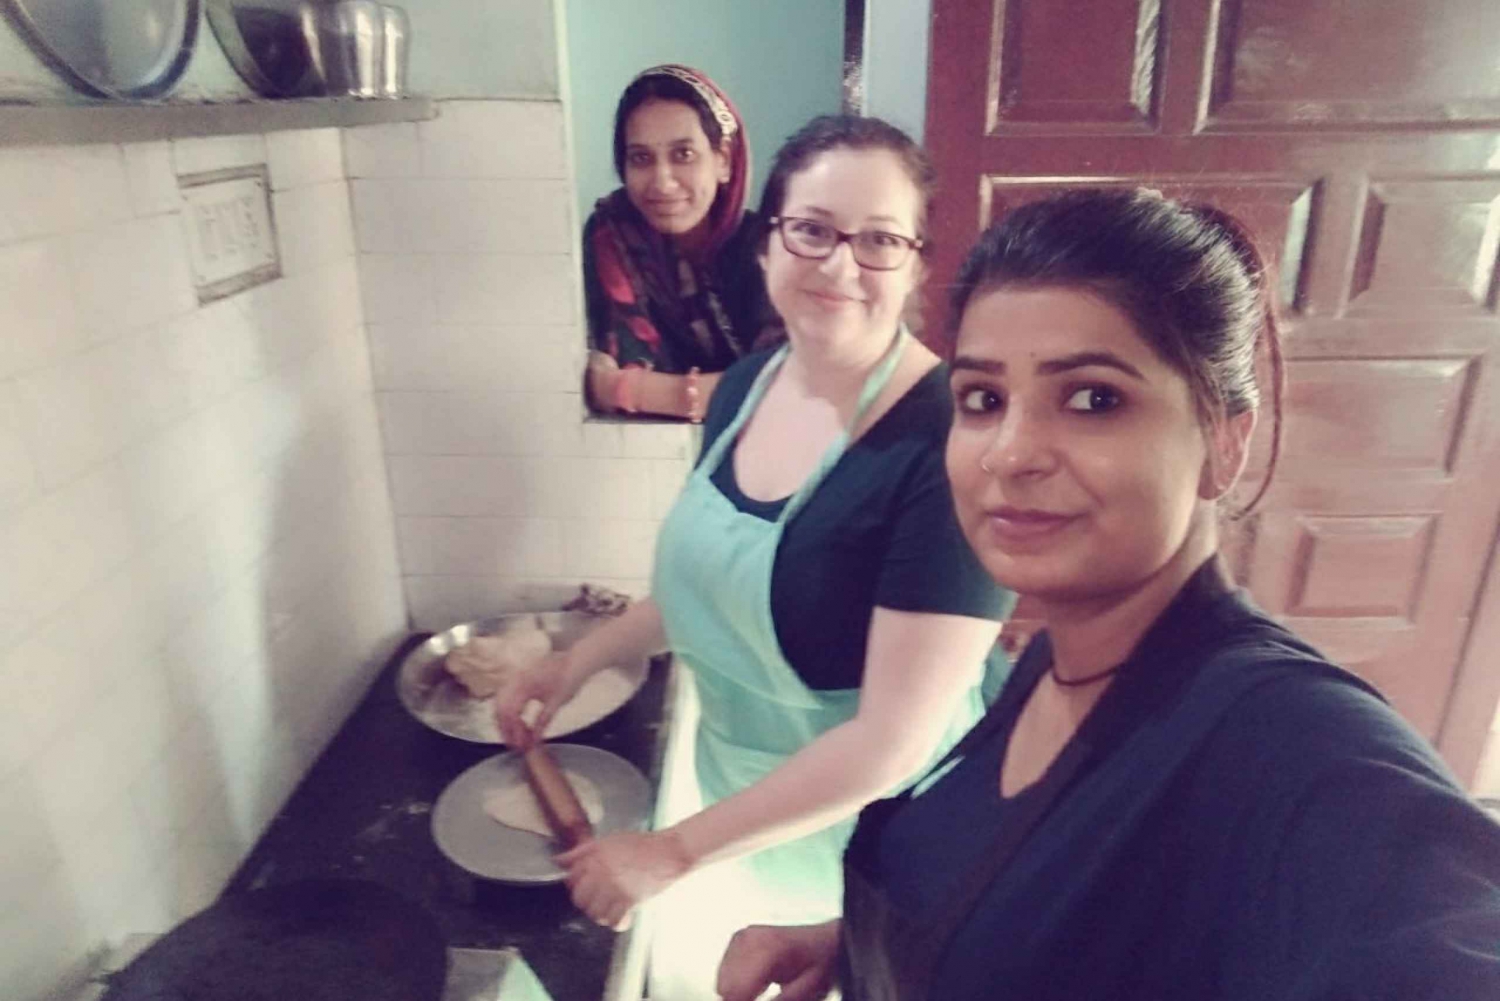 Udaipur: Private 4-Hour Indian Food Cooking Class with Meals